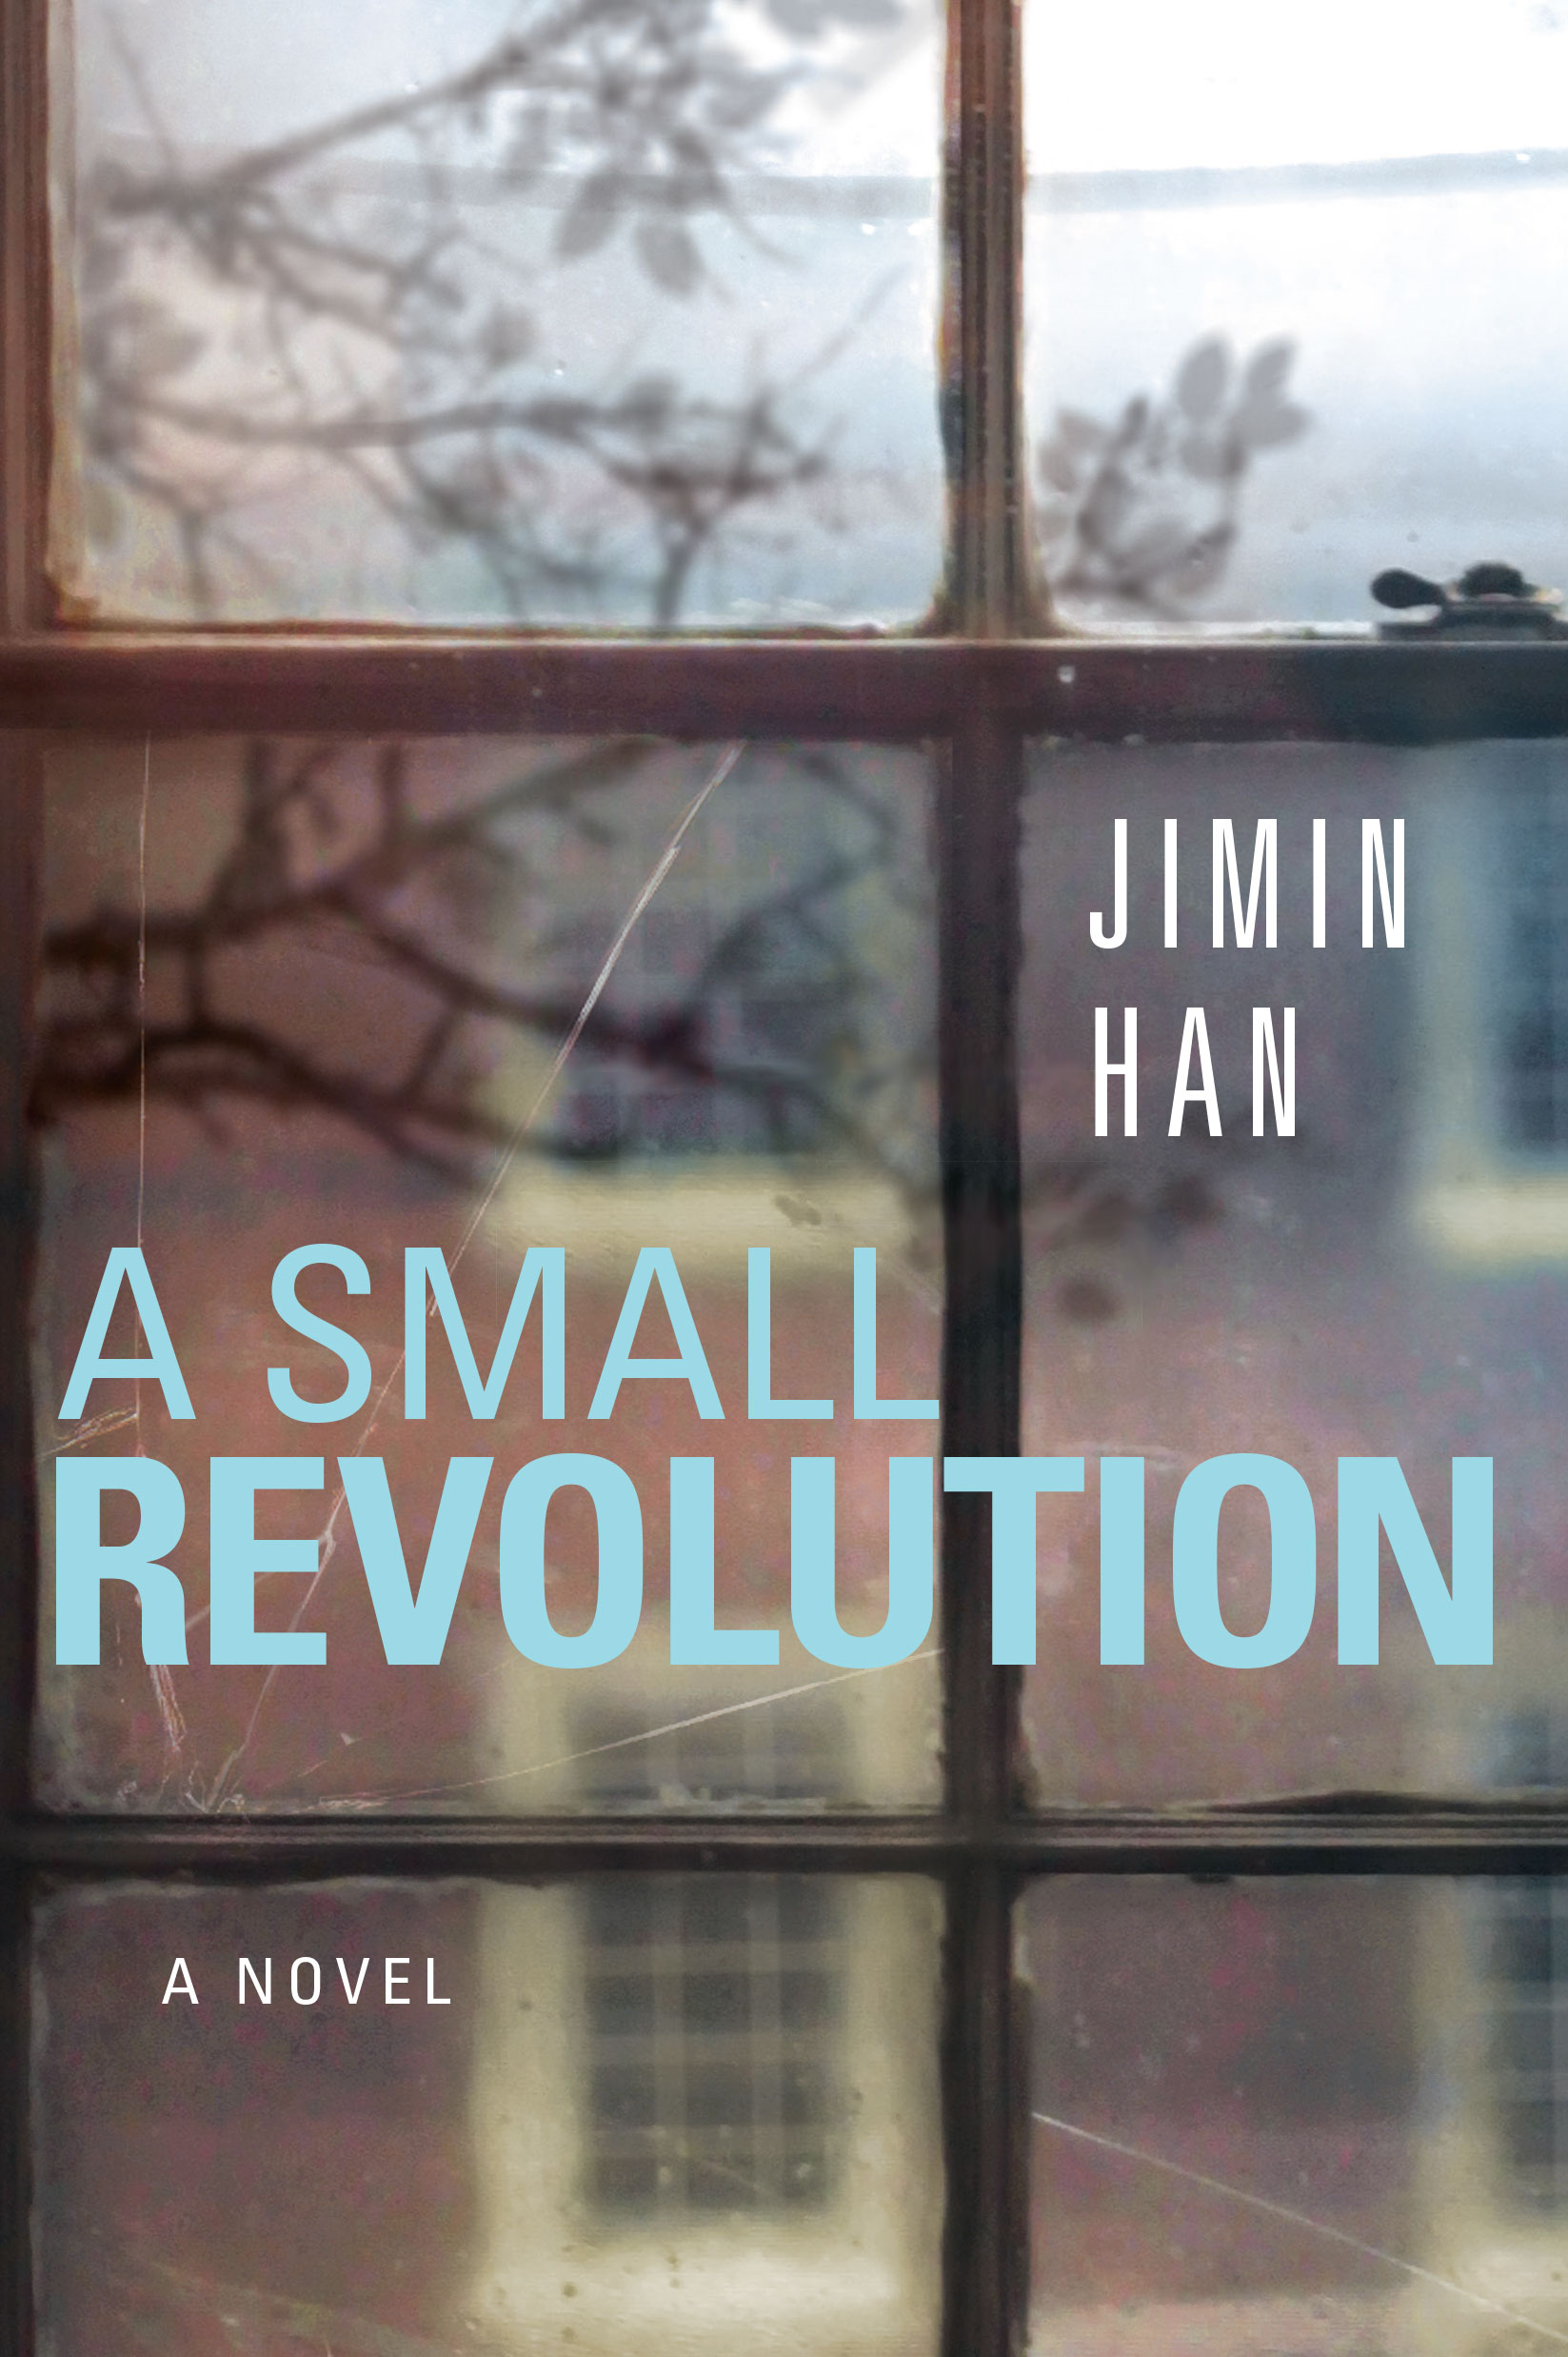  “We’ve all wondered what it’s like inside the rooms where the horrors unfold. Jimin Han’s relentless, timely  A Small Revolution &nbsp;grabs you by the collar and pulls you inside, then back through her sympathetic character’s history to answer that